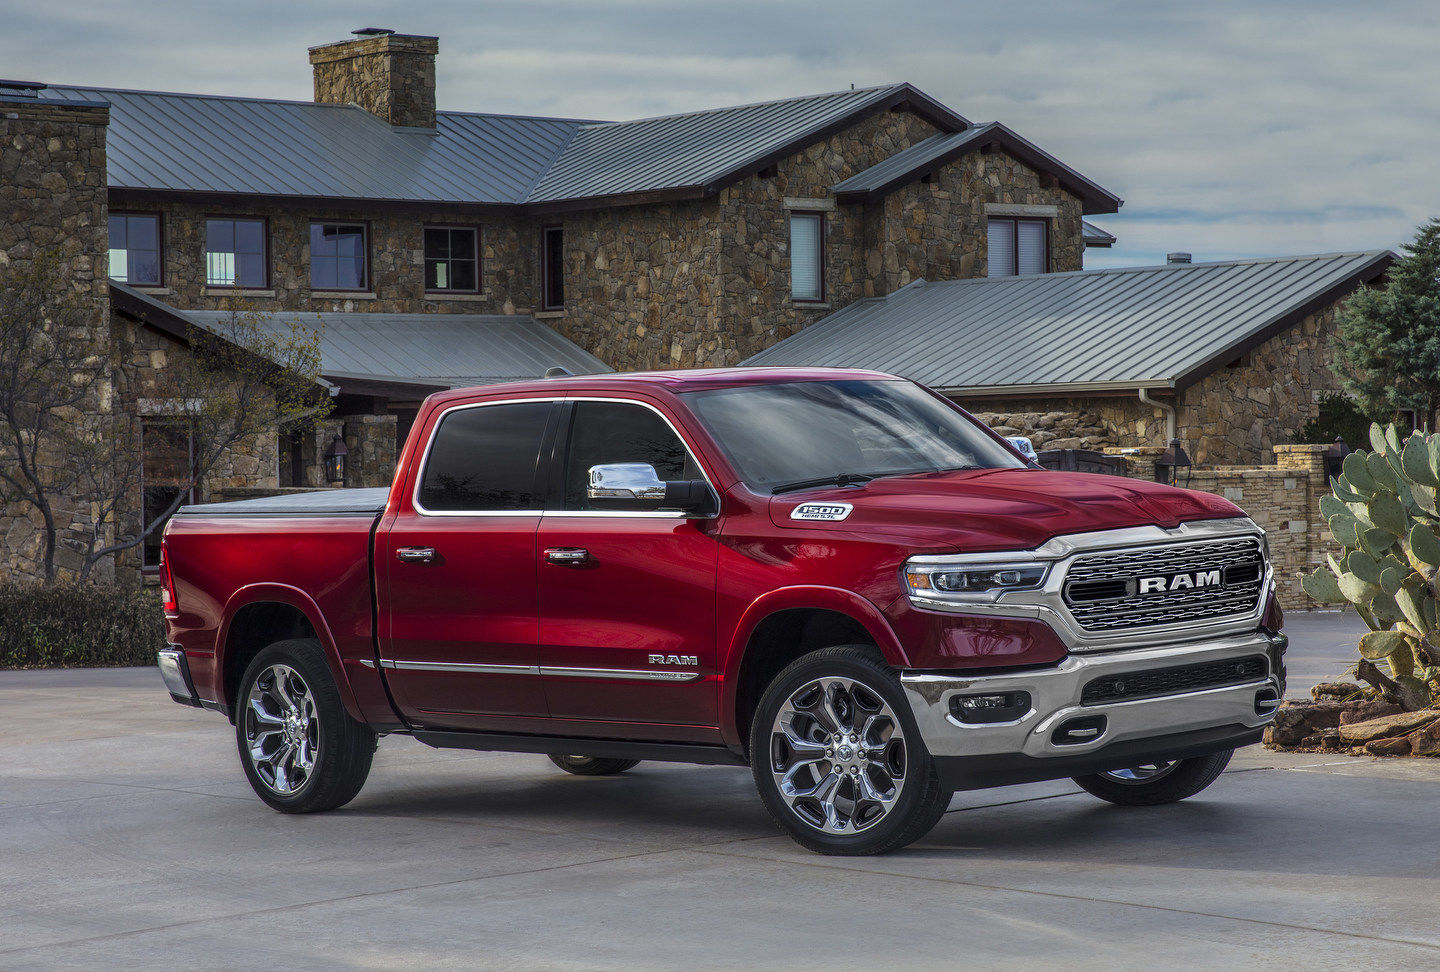 A look at the engine lineup offered in the 2022 Ram 1500